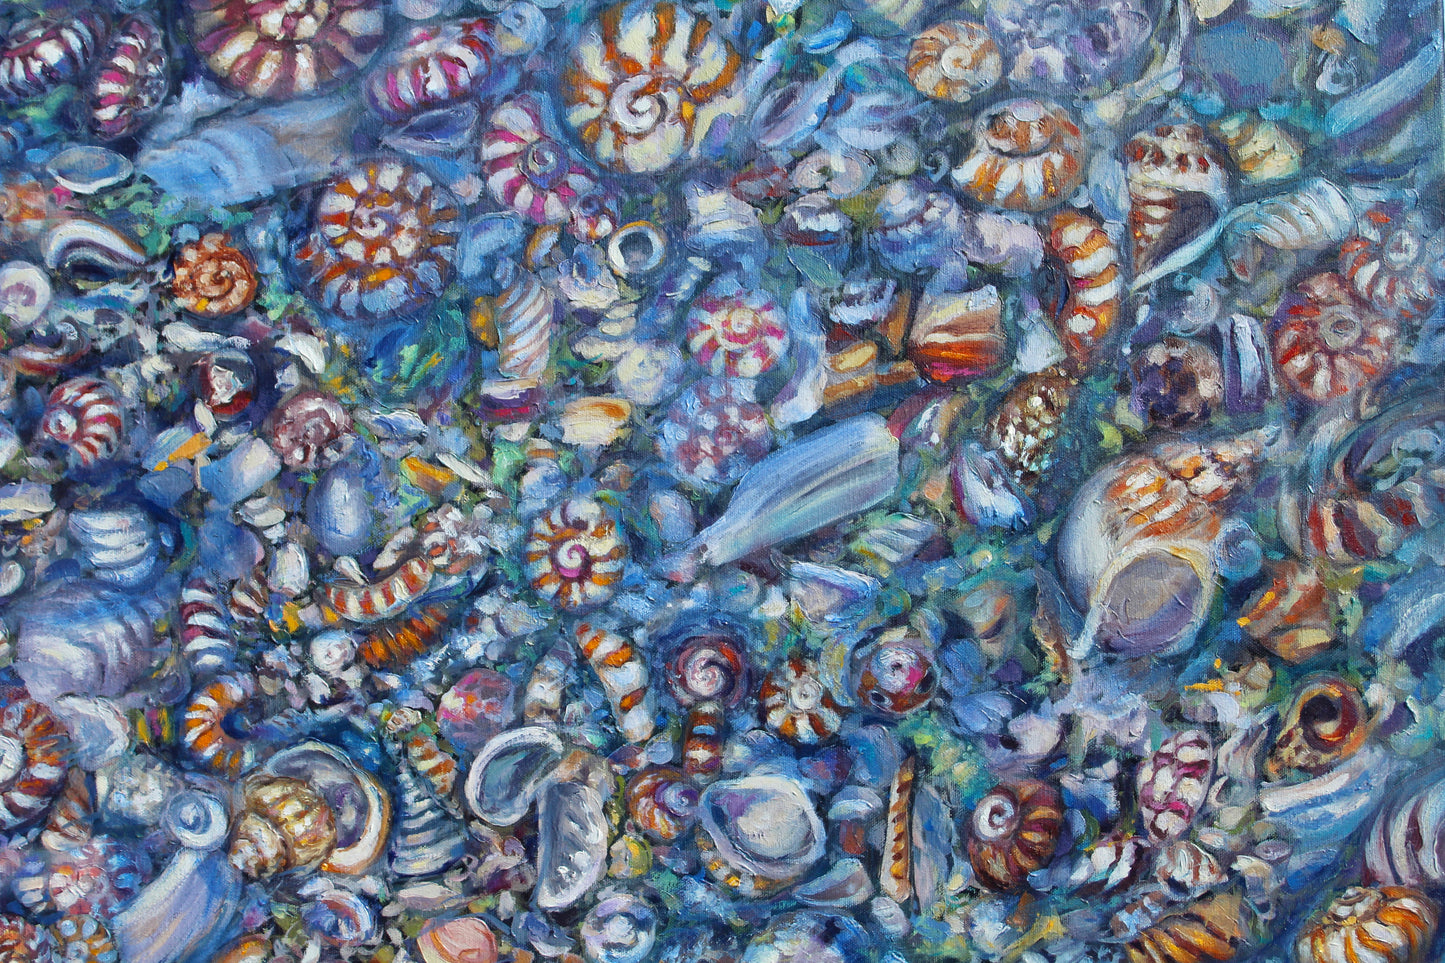 Tide Pool IV, An Original 40" x 60" Highly Detailed Seashell Oil Painting On Canvas